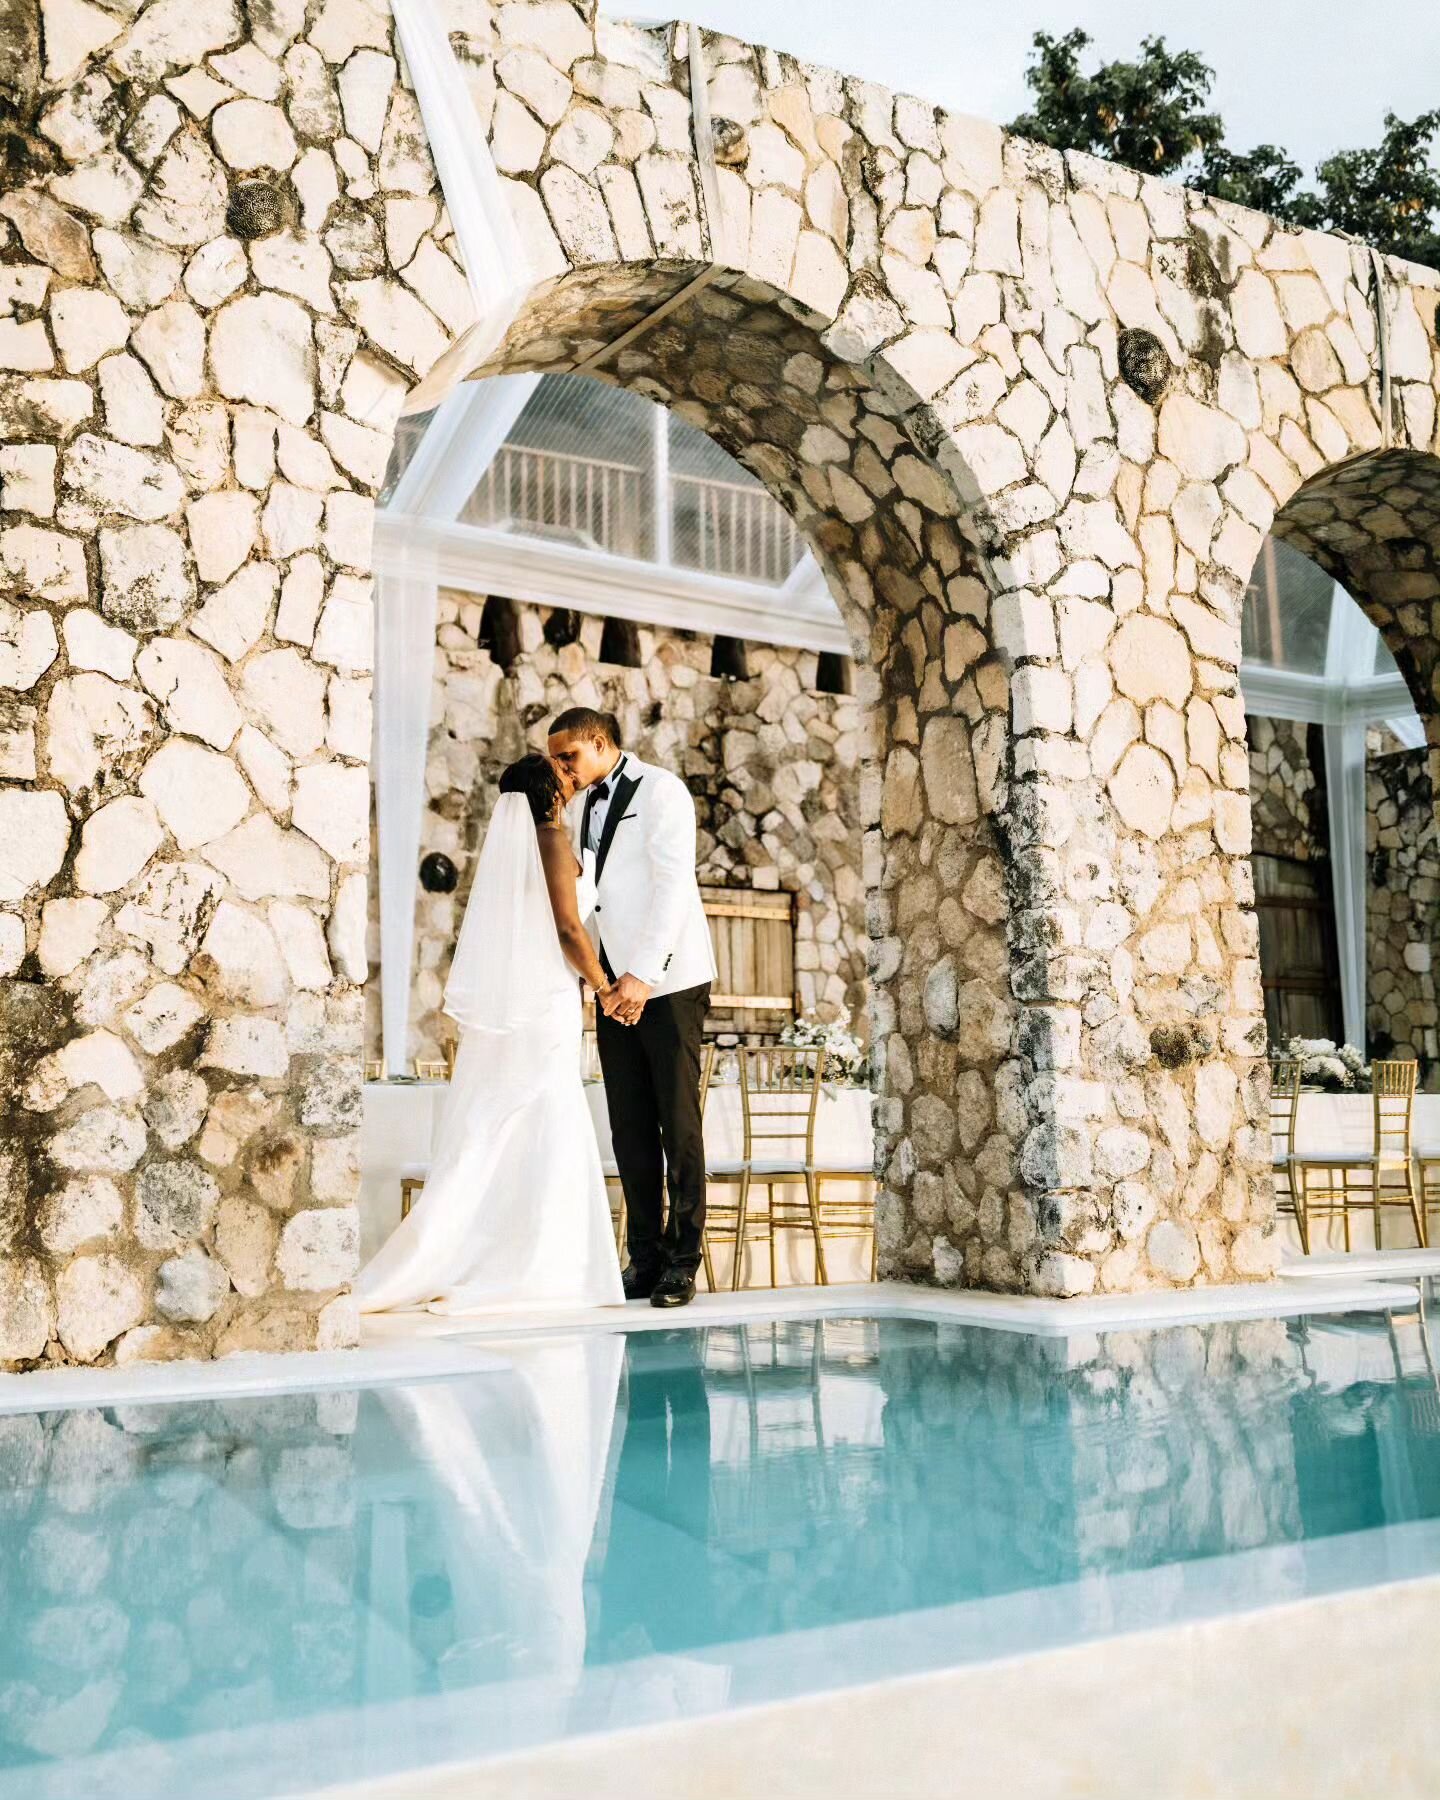 I haven't posted a lot from this wedding yet but I couldn't not share this stunning photos from @always_hayls &amp; @haydiansmith incredible wedding in Jamaica last month! 

I can't wait to share so much more from this wedding ❤️

So thankful to have